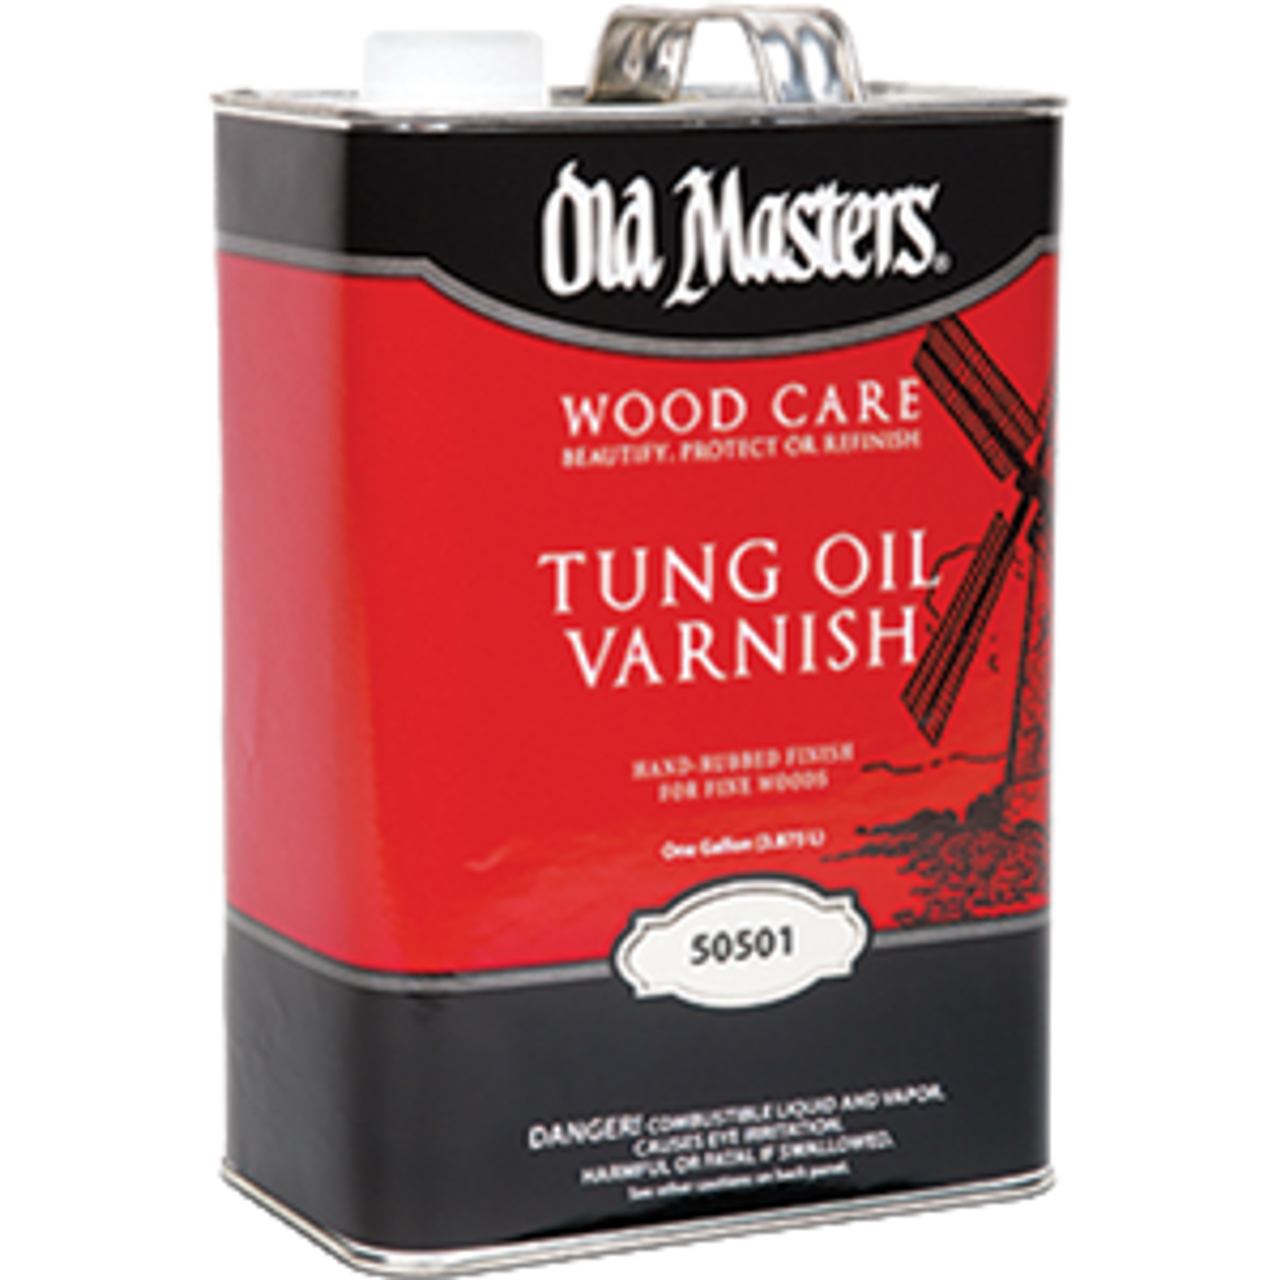 OLD MASTERS 50501 1G TUNG OIL VARNISH